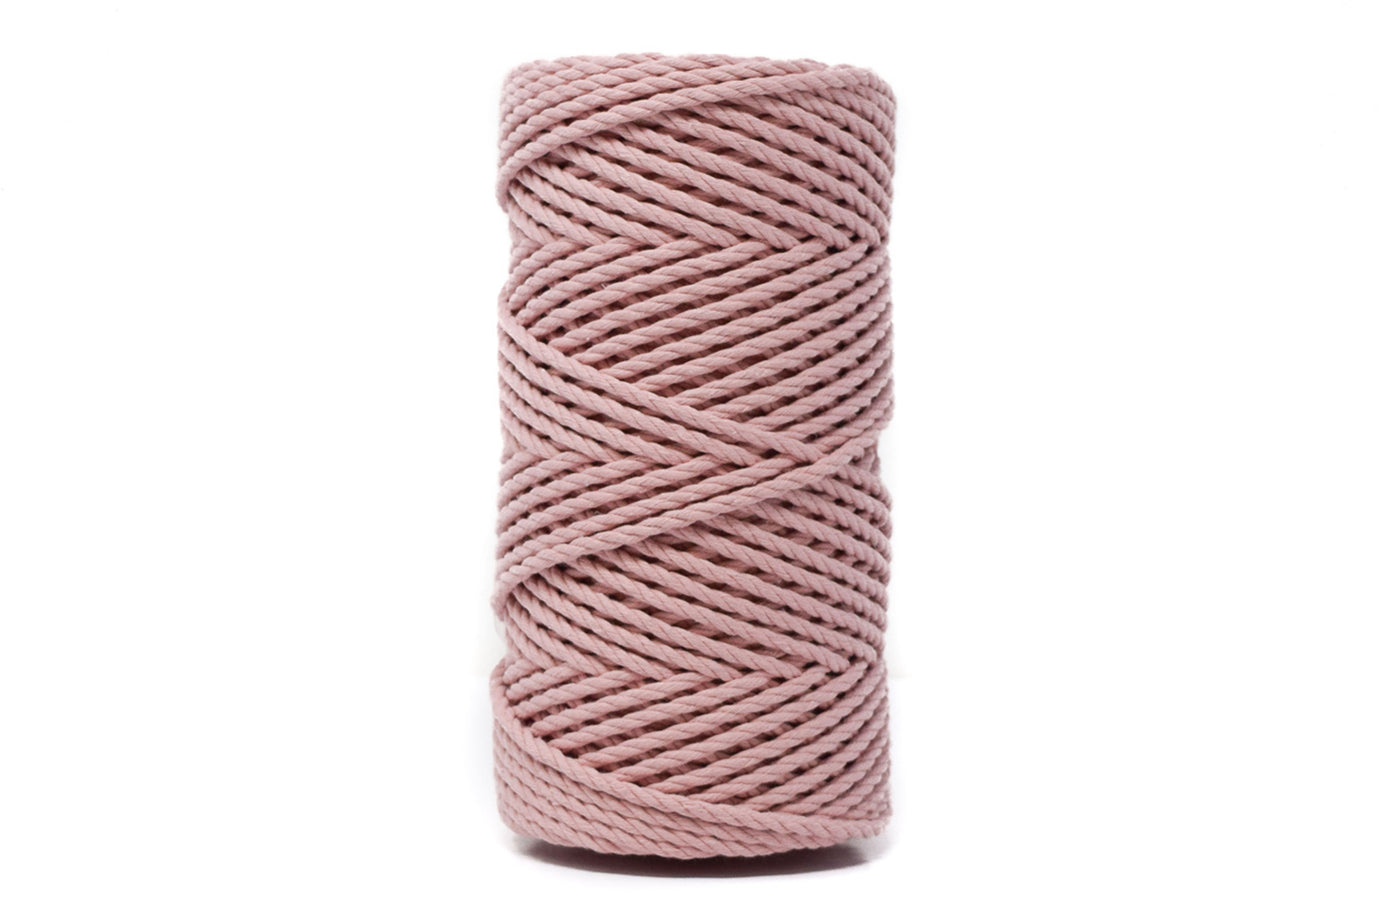 COTTON ROPE ZERO WASTE 3 MM - 3 PLY - BALLET PINK COLOR